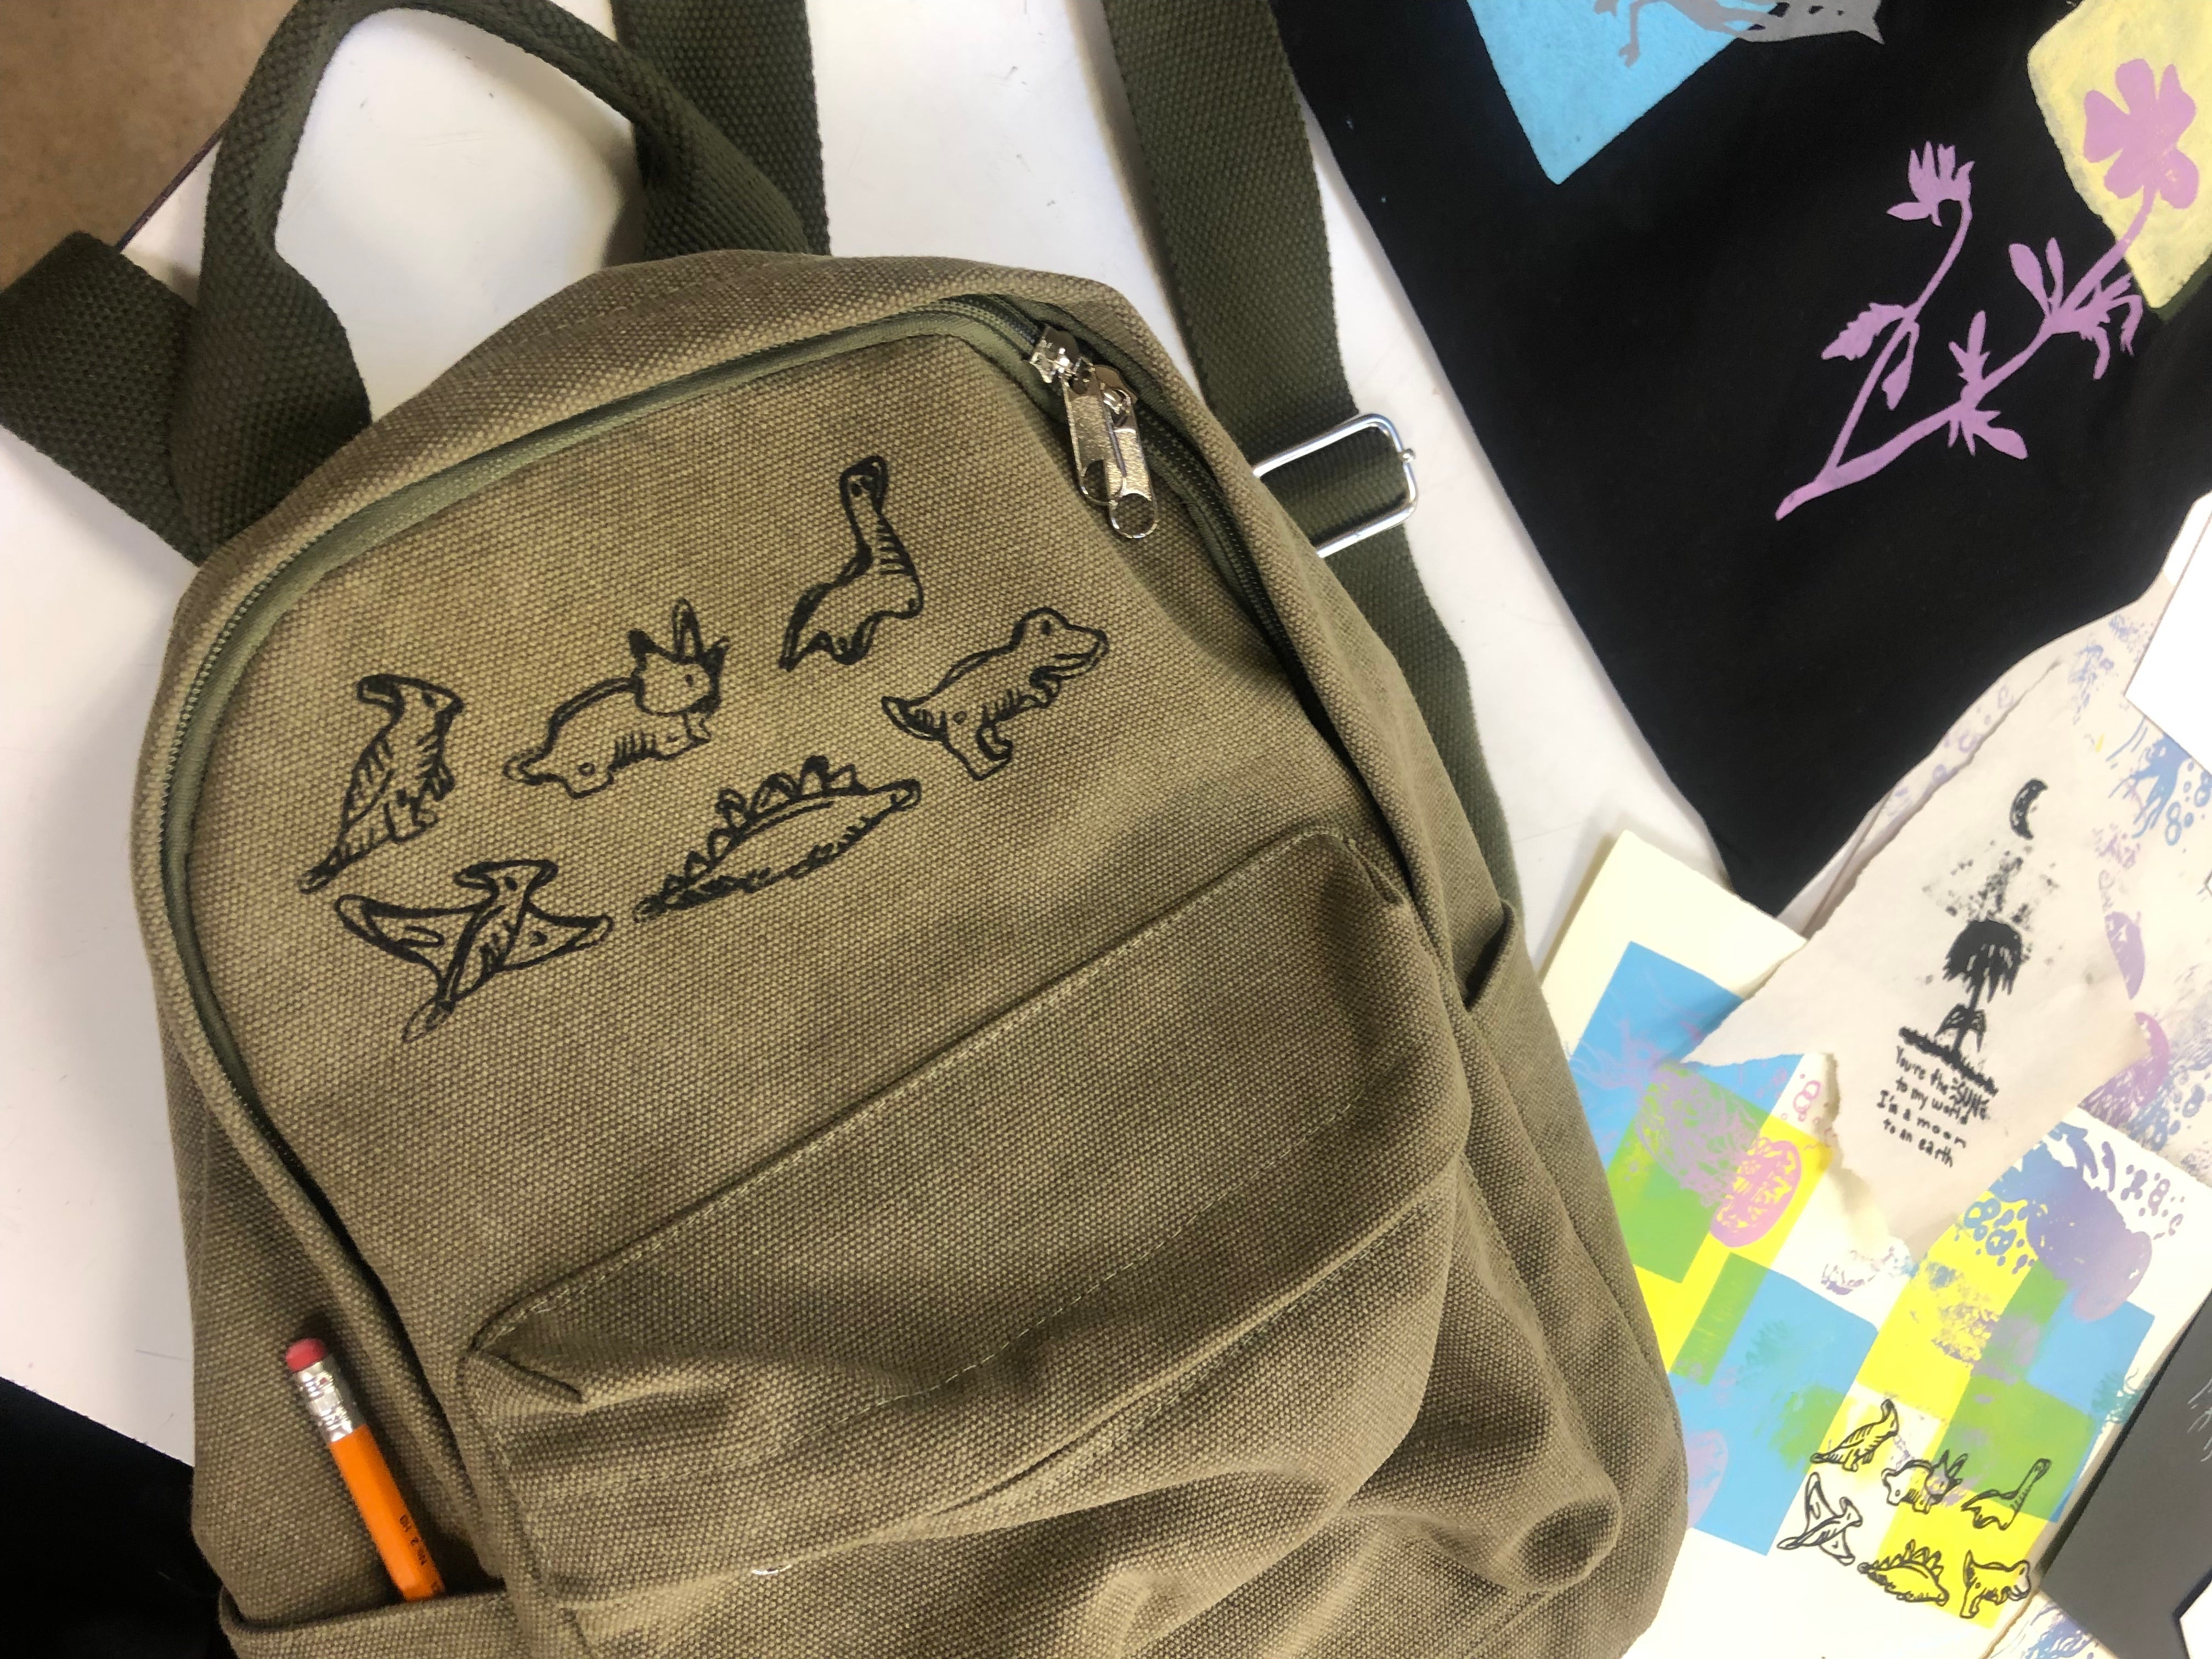 A backpack with a student-made screen-printed dinosaur design on it